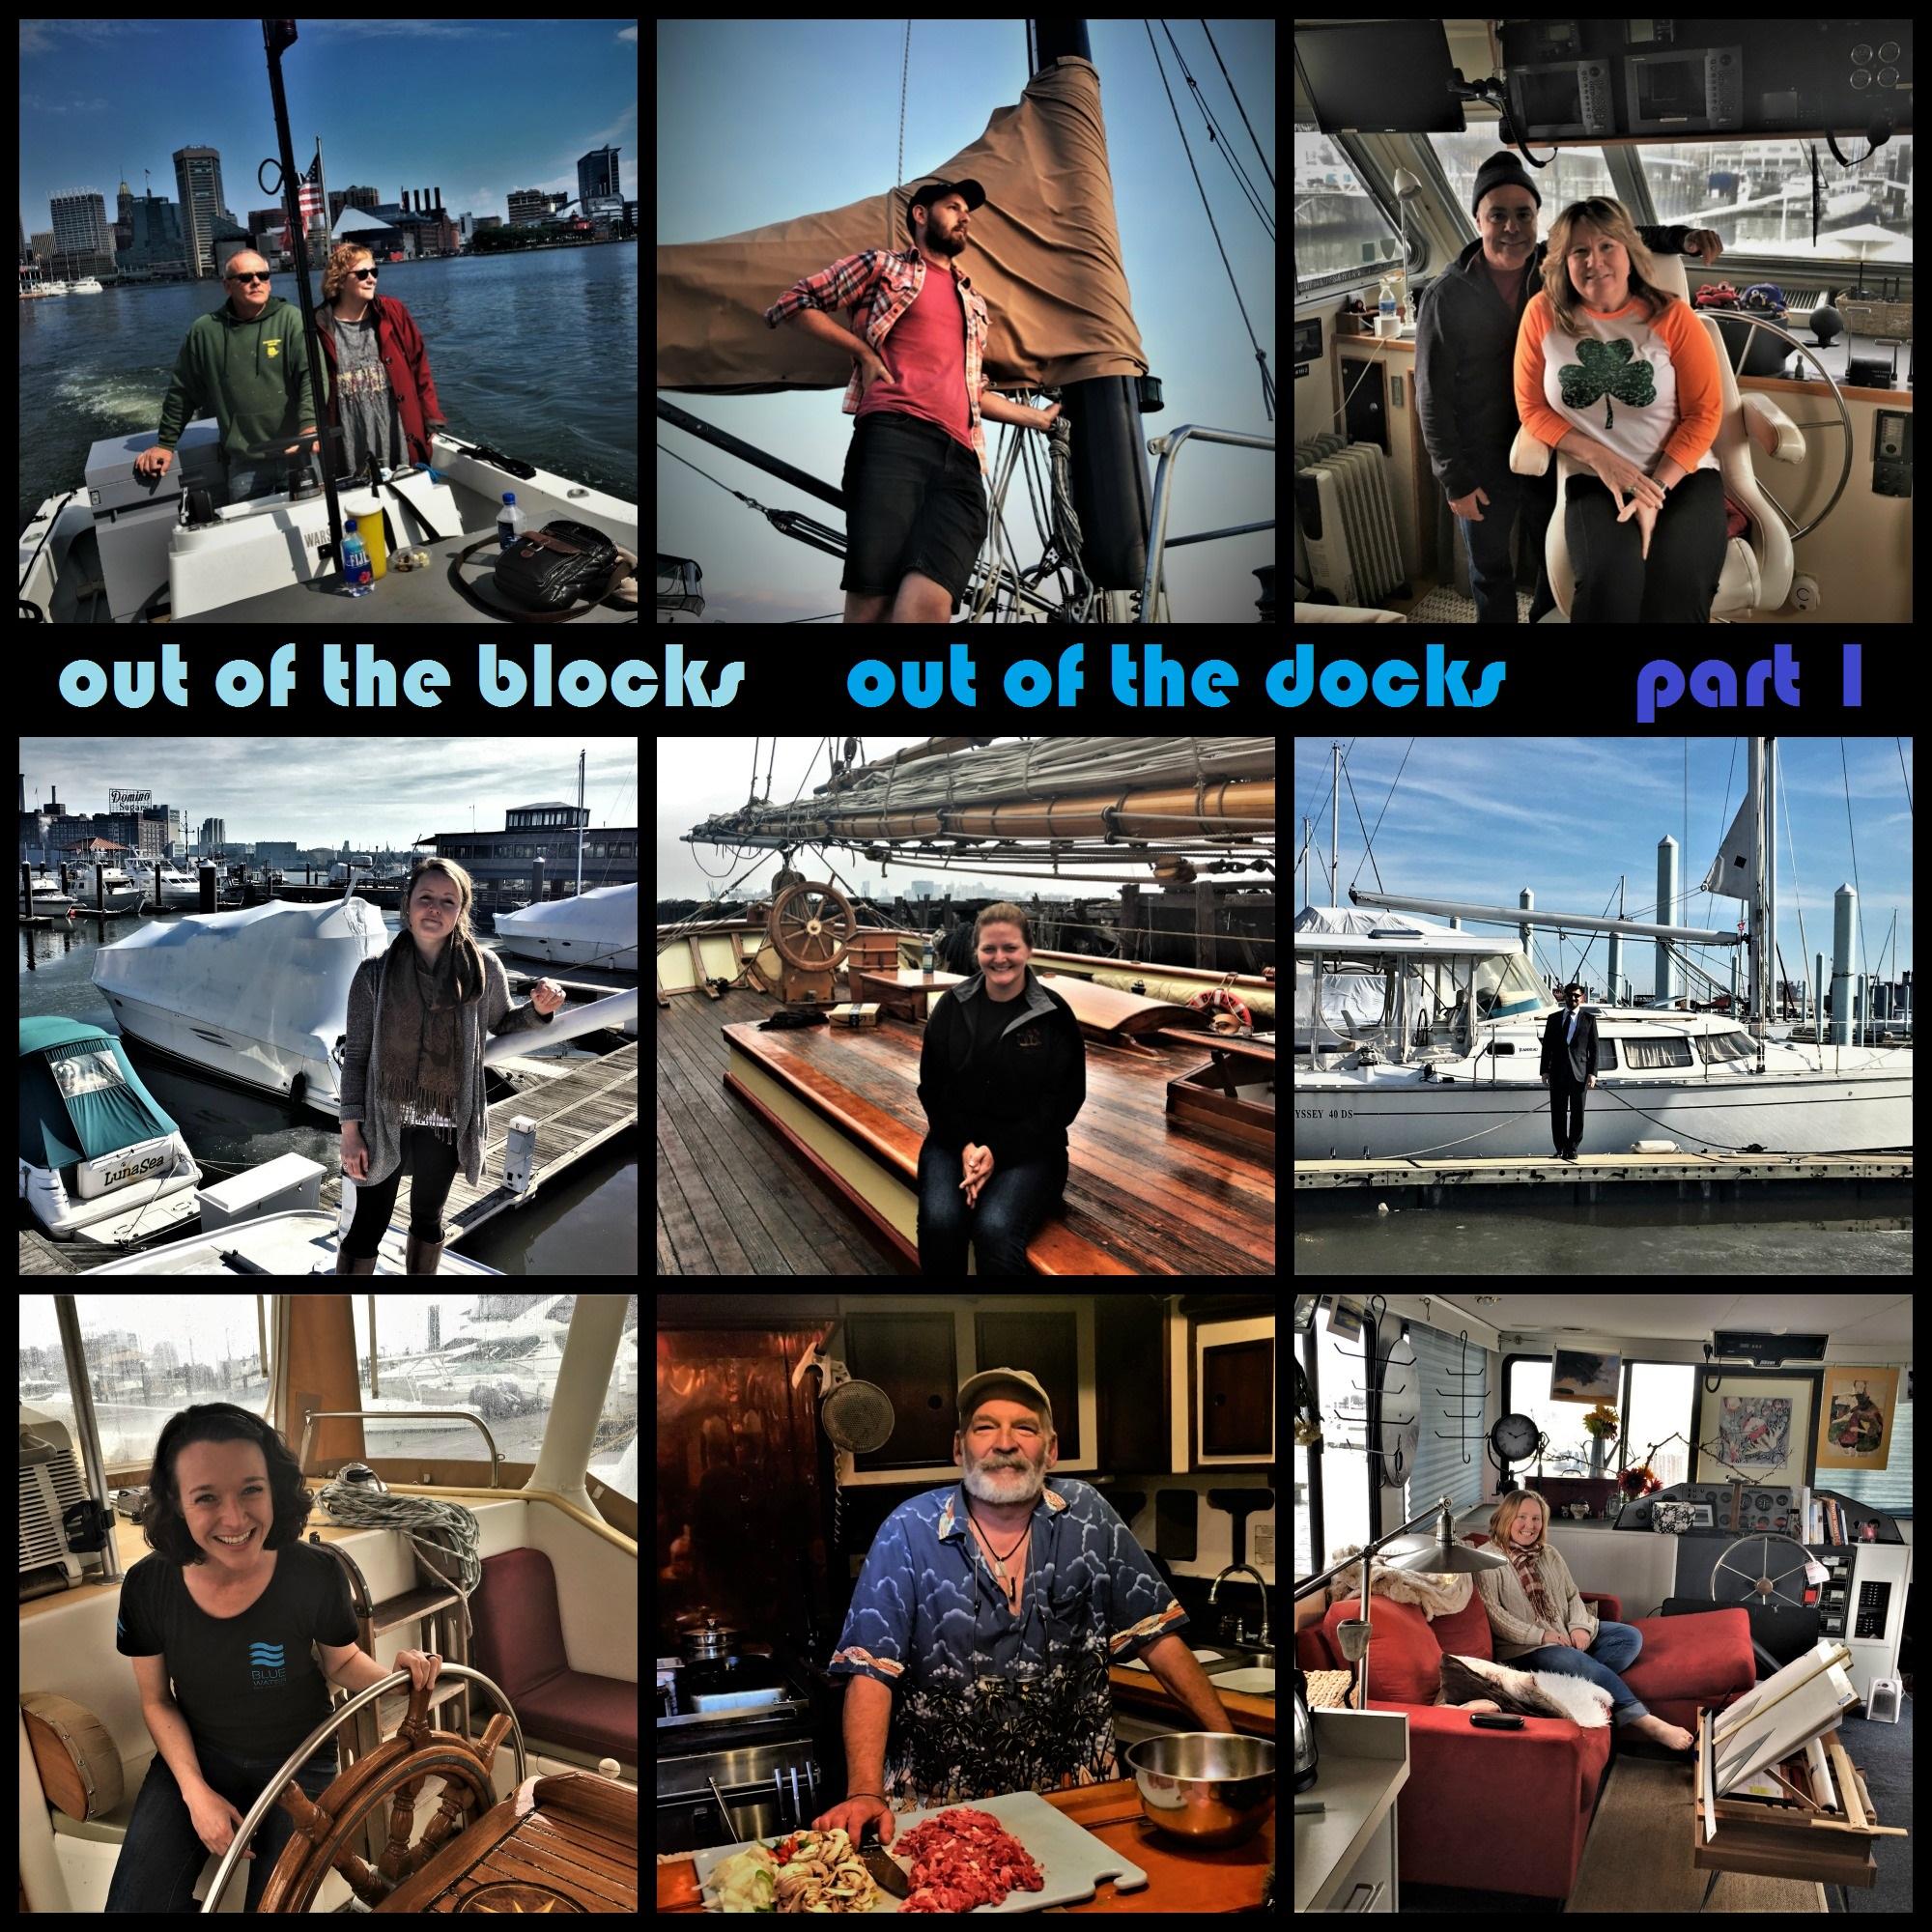 Thumbnail for "Out of the Docks, part 1:  Life Aboard".